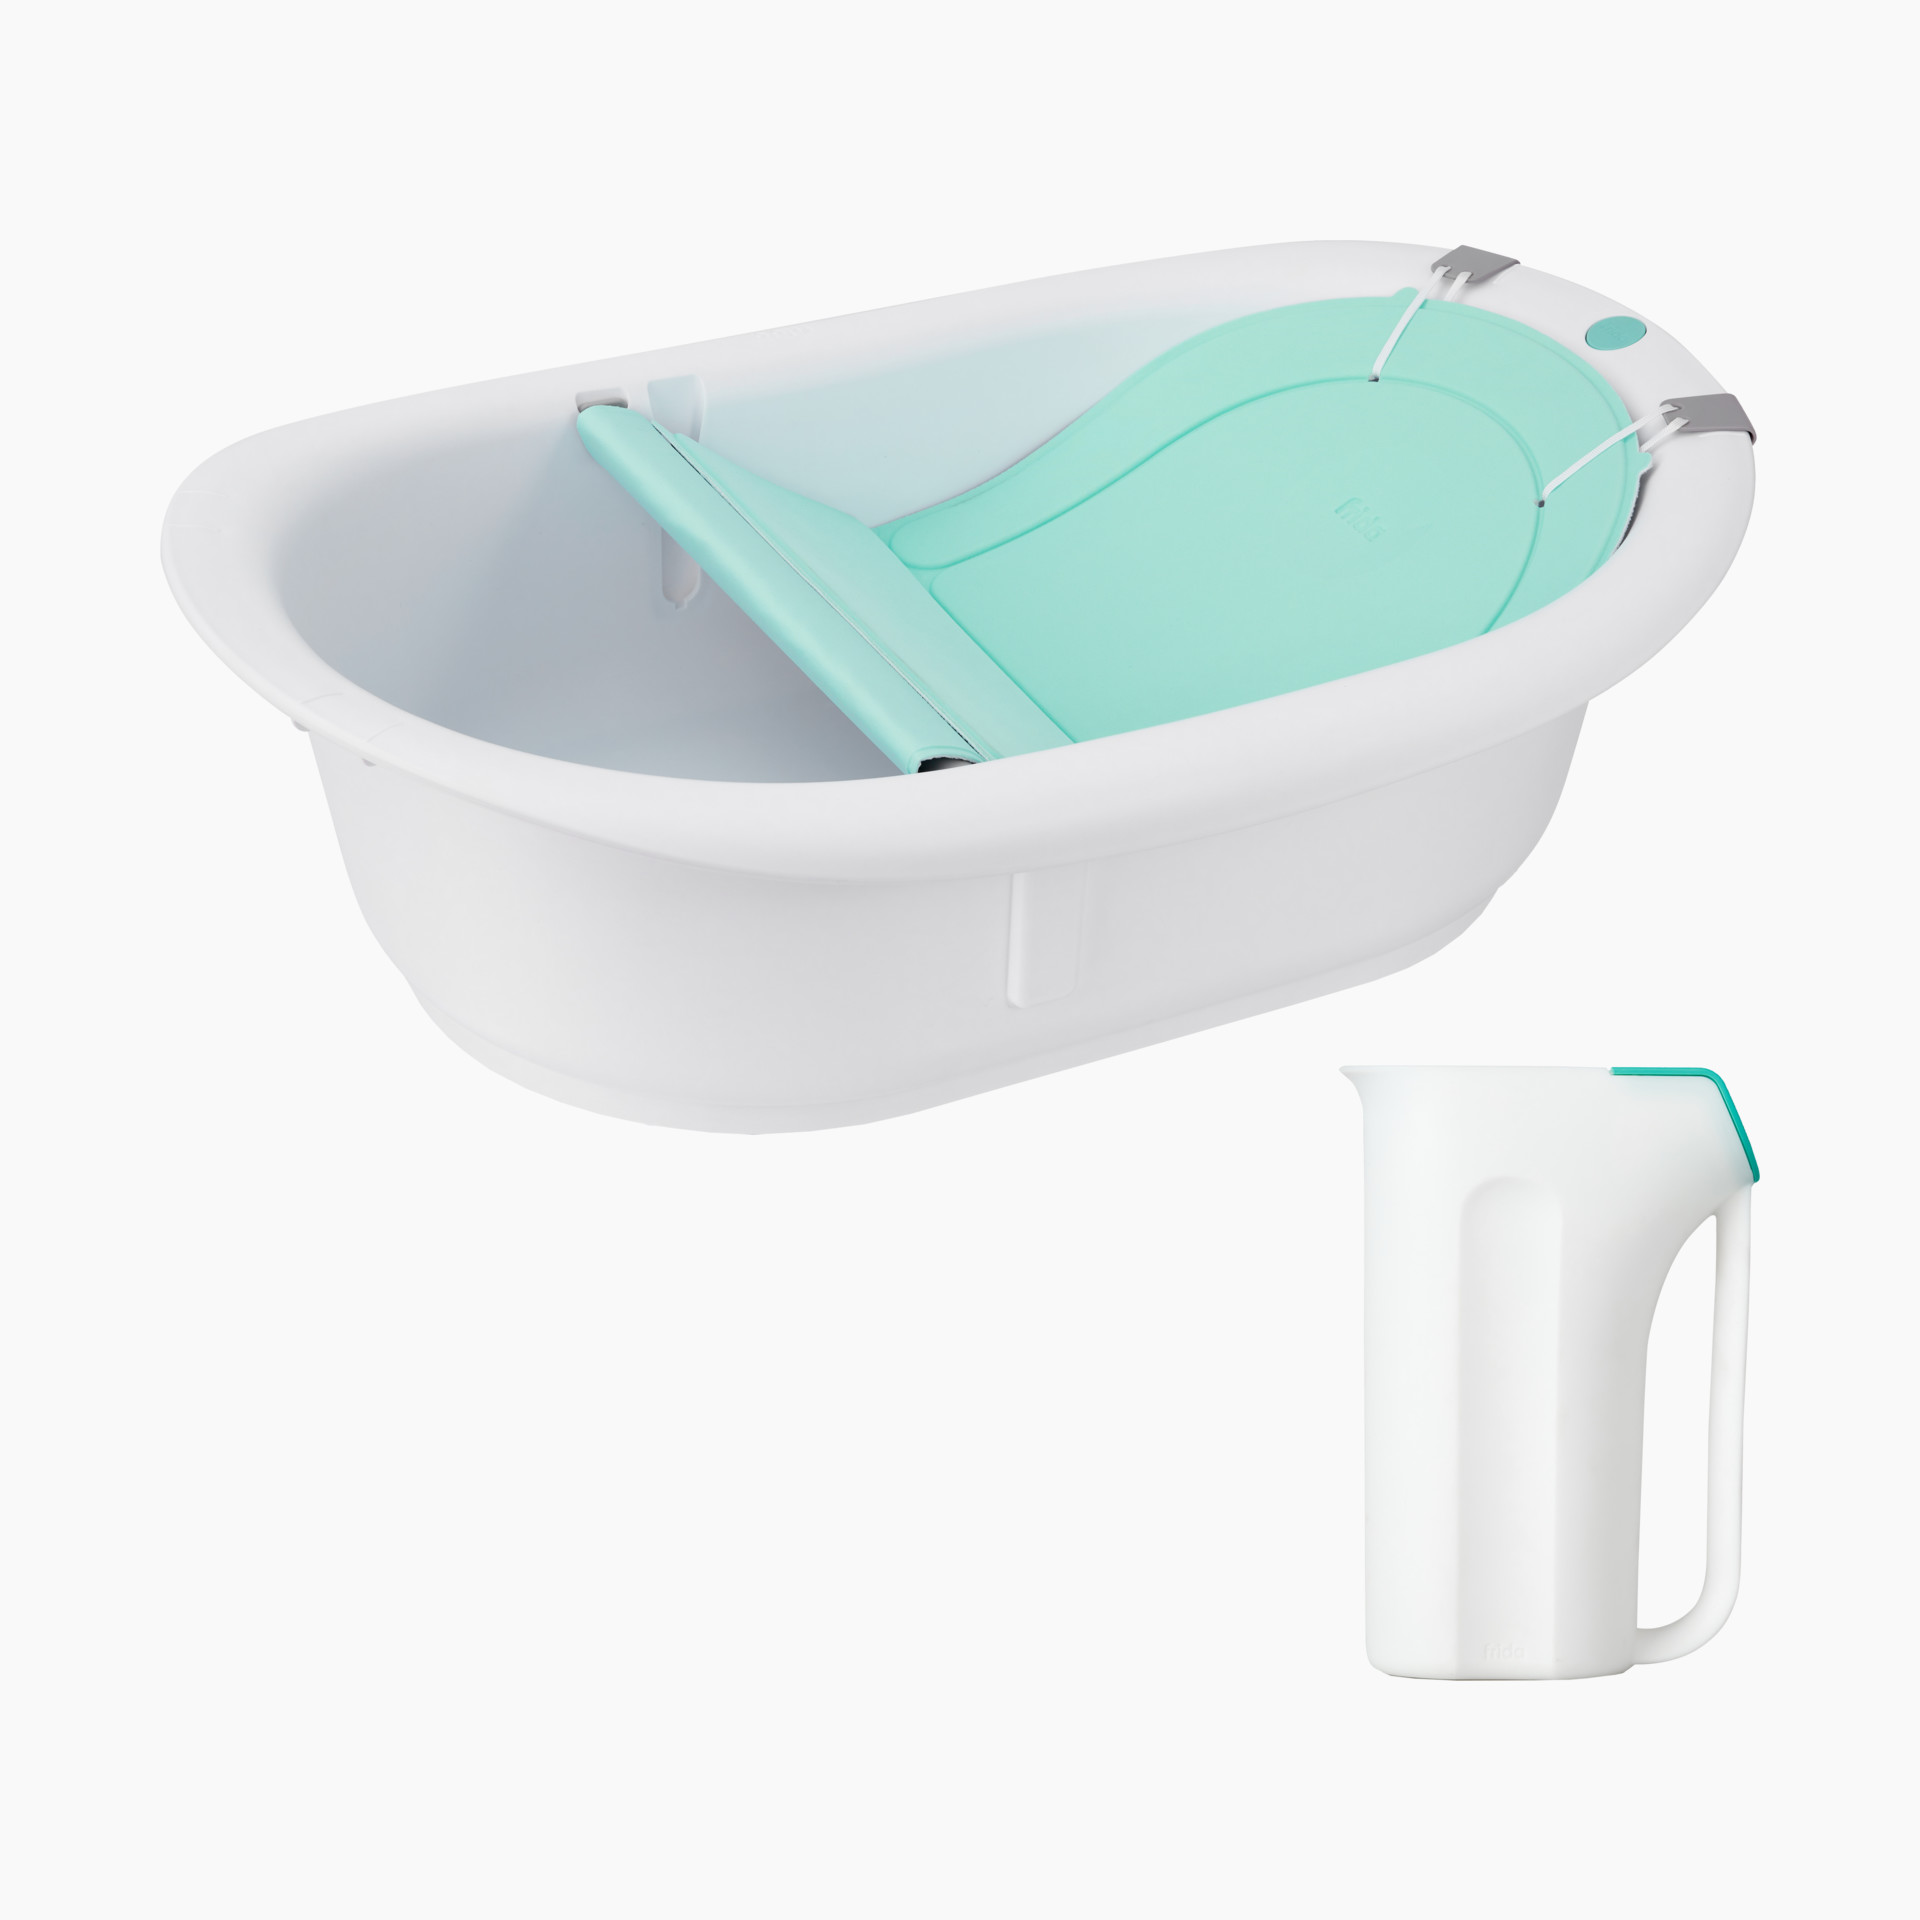 Product details about Frida Baby 4-in-1 Grow-with-Me Bath Tub